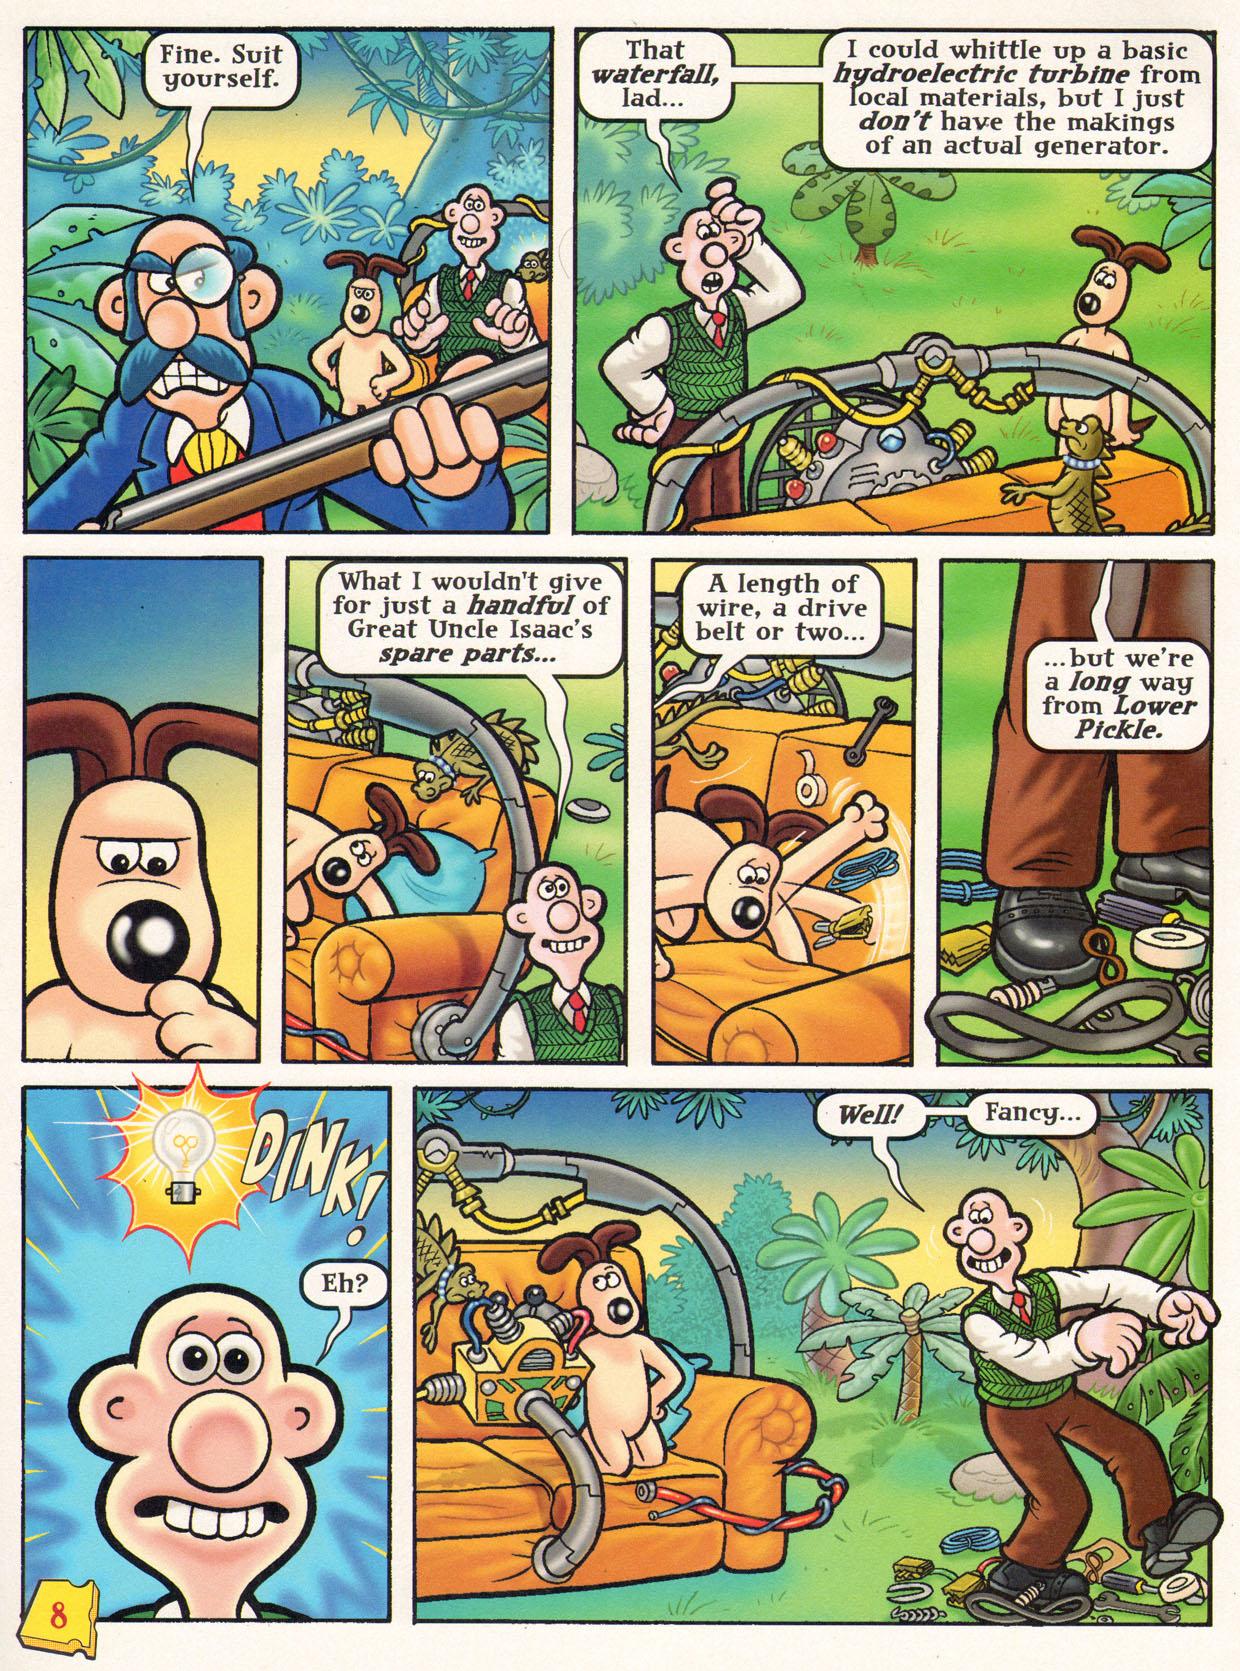 Read online Wallace & Gromit Comic comic -  Issue #12 - 8